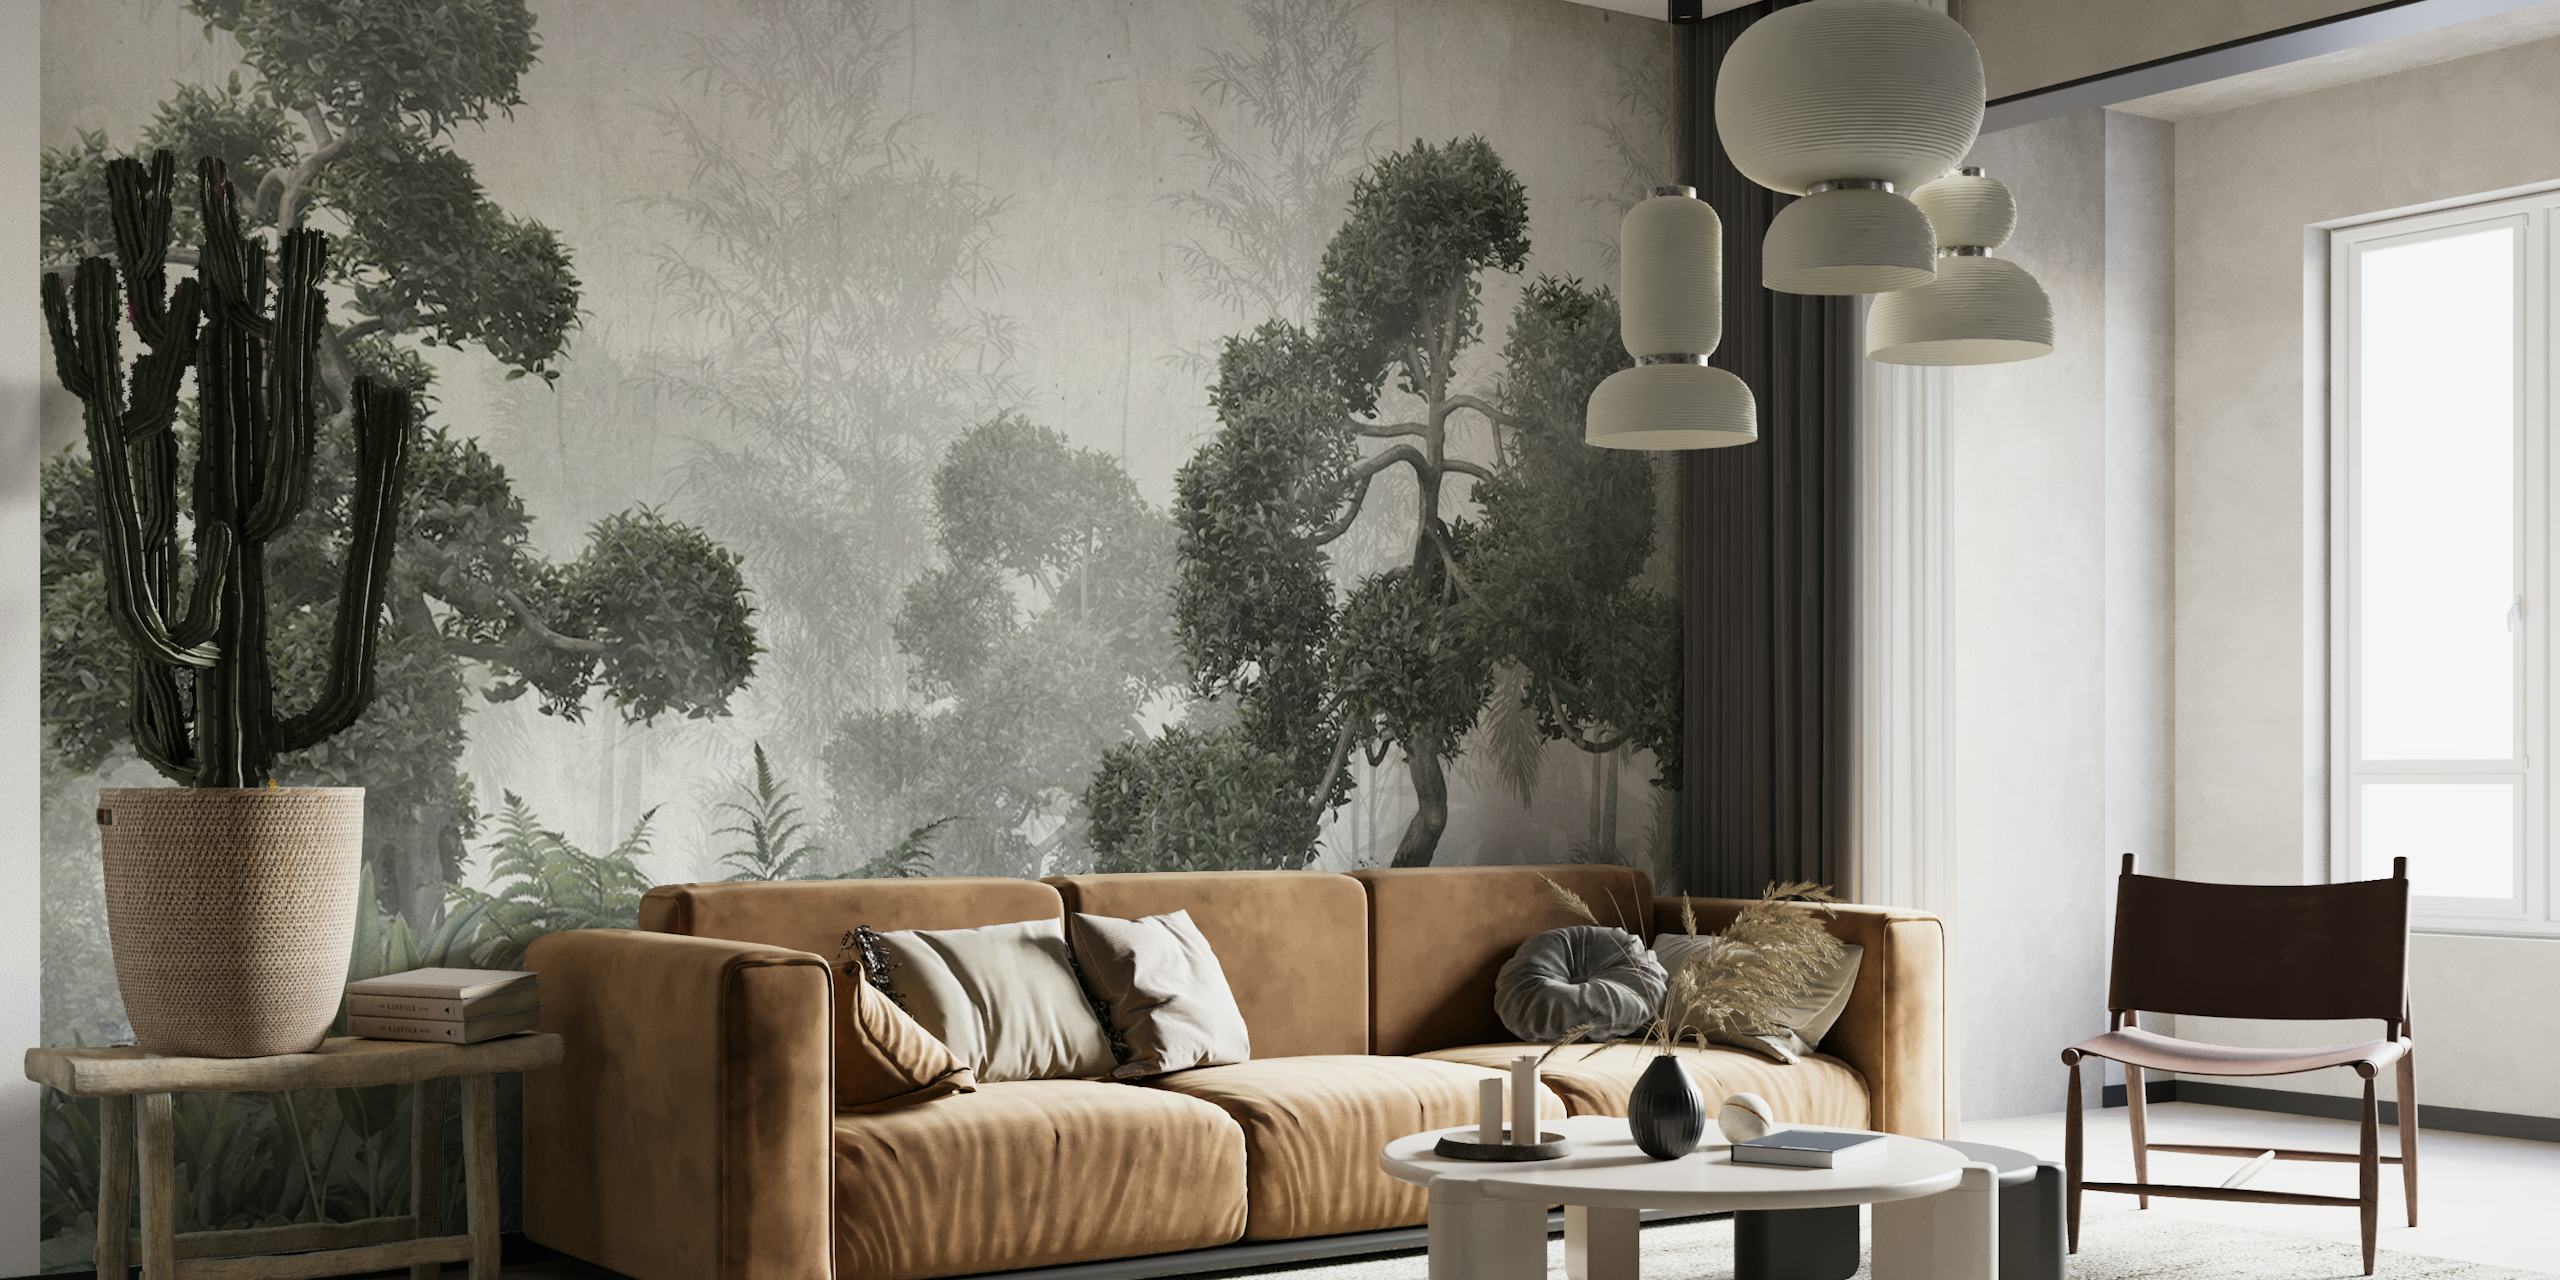 Monochrome tropical trees wall mural with foggy background